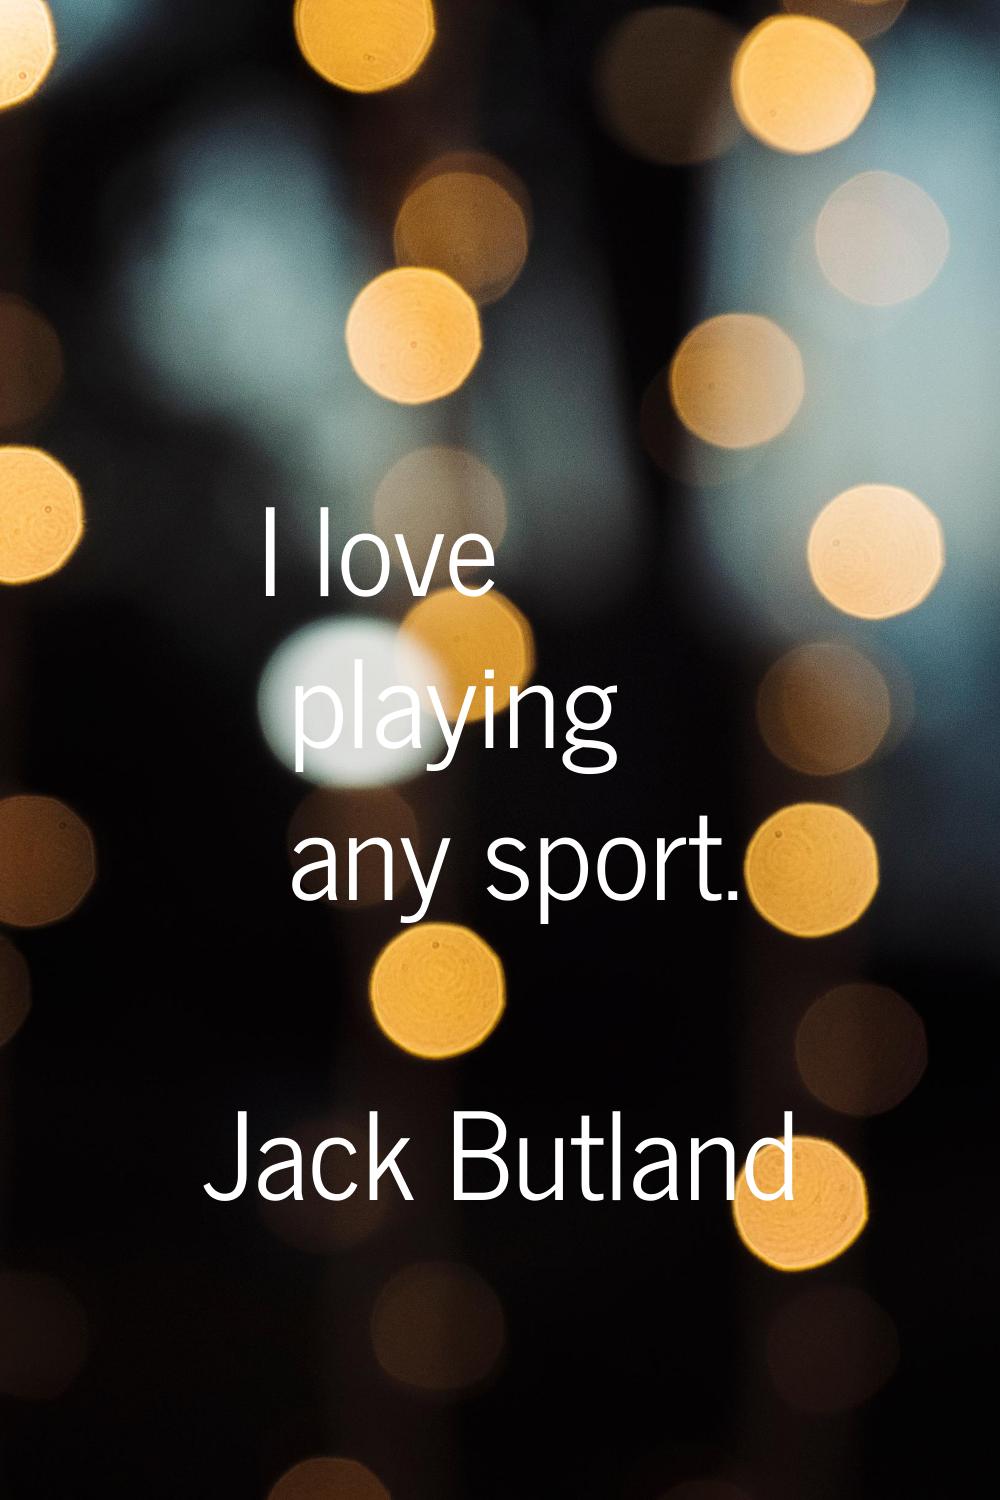 I love playing any sport.